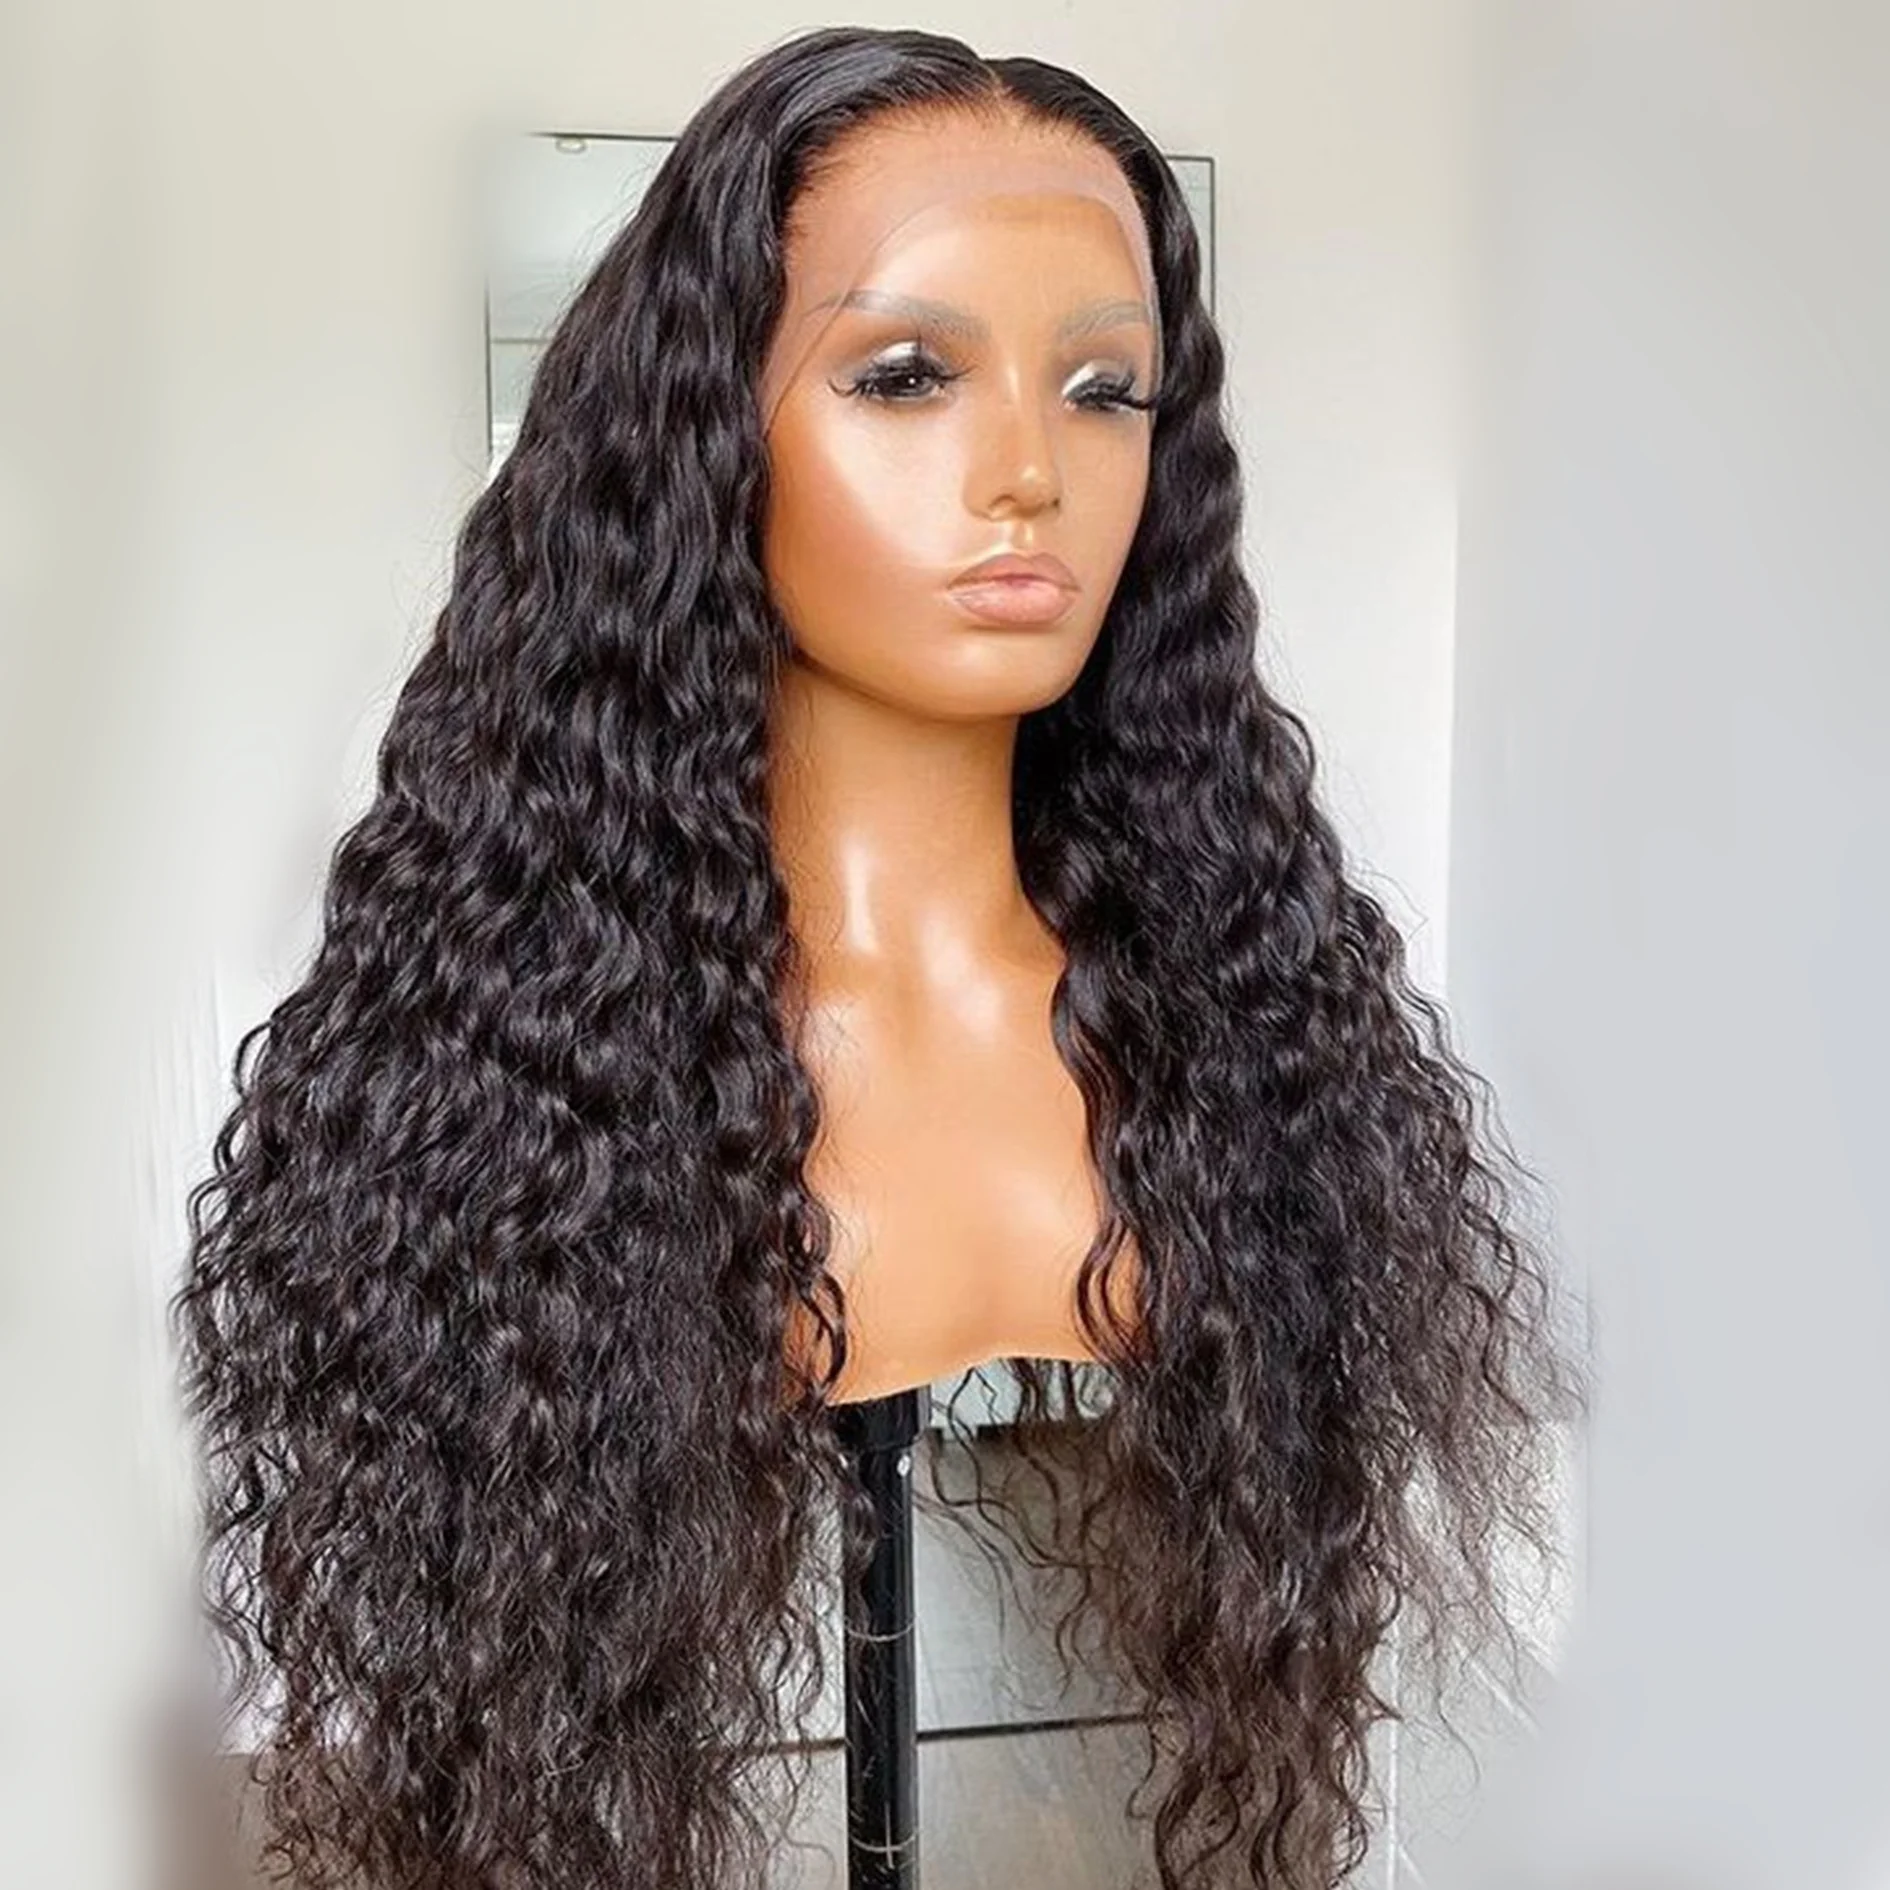 

Human Wig Kinky Curly 250 Density Natural Color Virgin Hair Cosplay Wig Hd Human Raw Hair Wholesale Lace Front Wigs 12A Grade, Any color can be offered